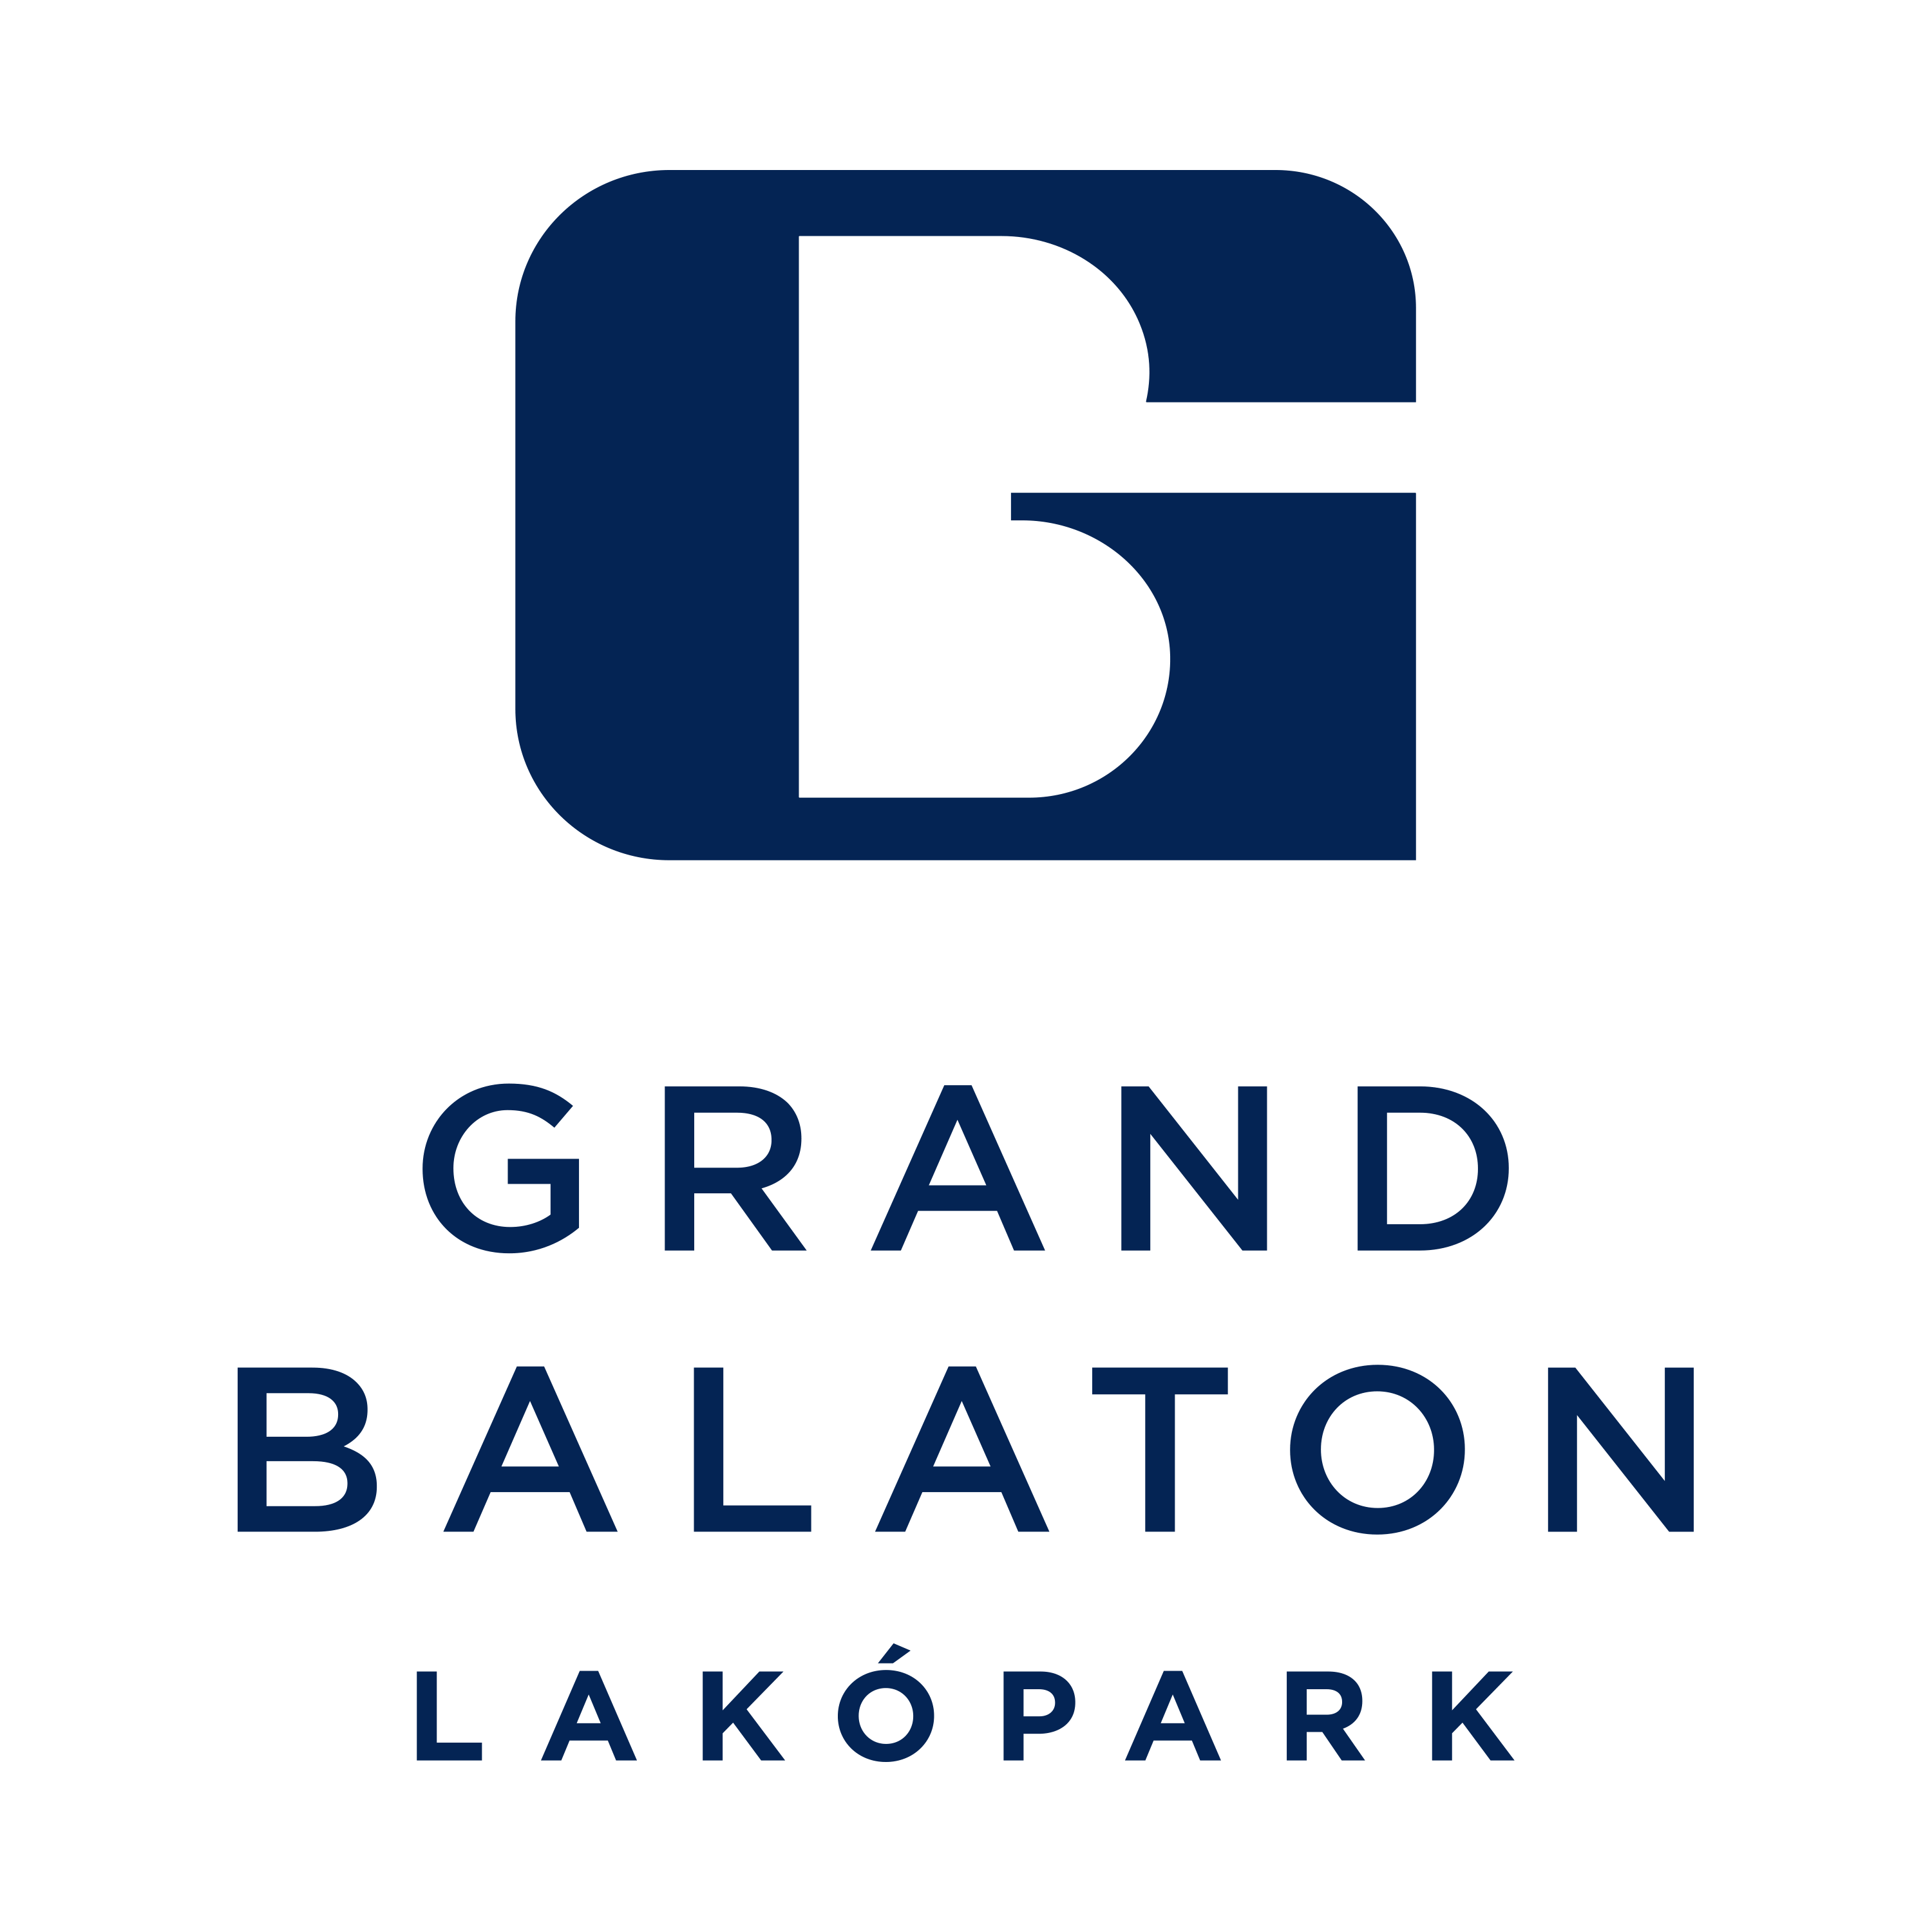 Grand Balaton will be built on the eastern shore of Lake Balaton, in the center of Balatonakarattya. The M7 and future M8 motorways are 3 minutes away and Budapest can be reached by car in just 45 minutes.